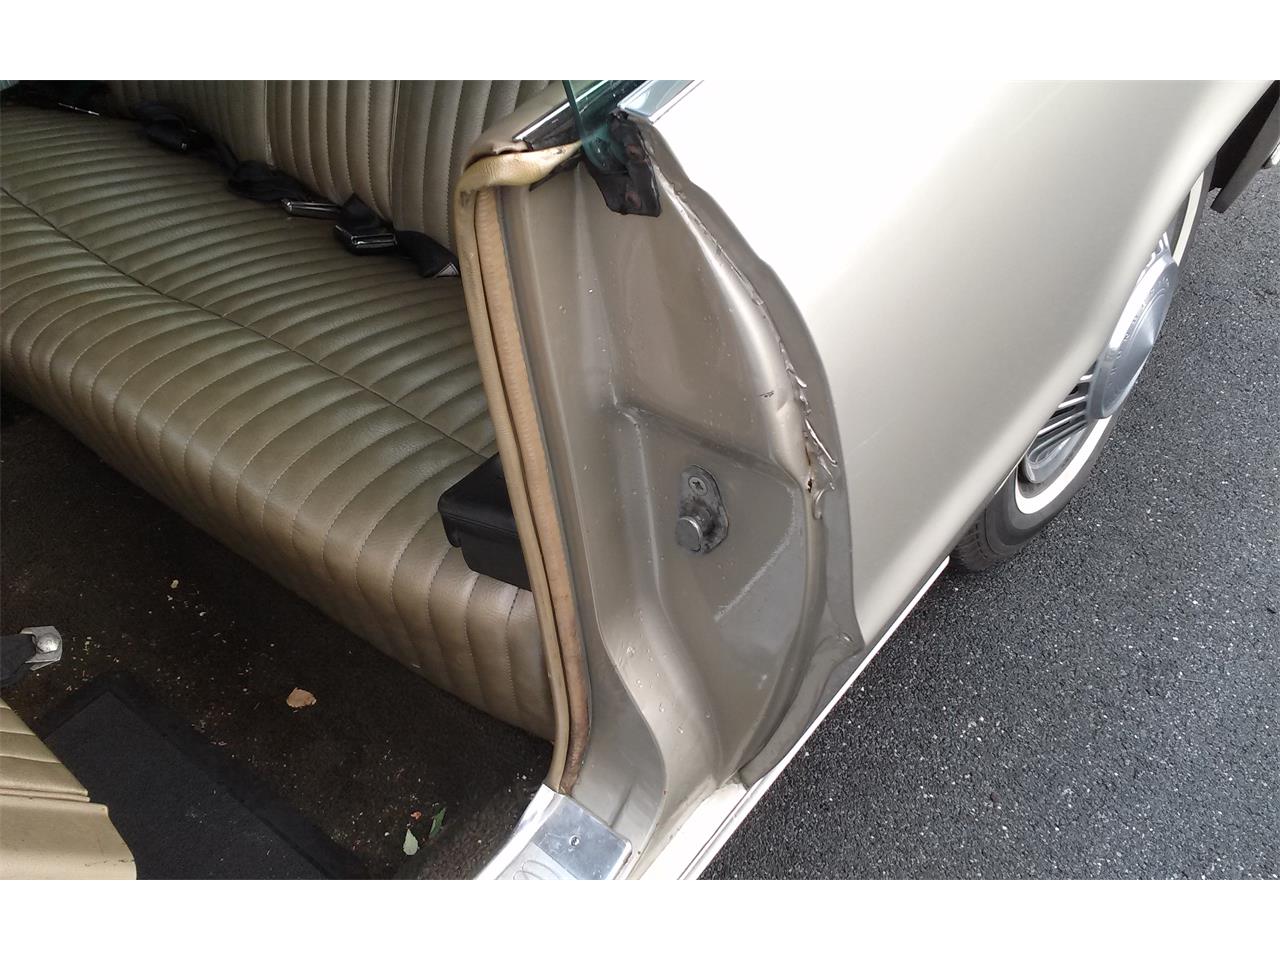 1968 Ford Thunderbird for sale in Rockville, MD ...